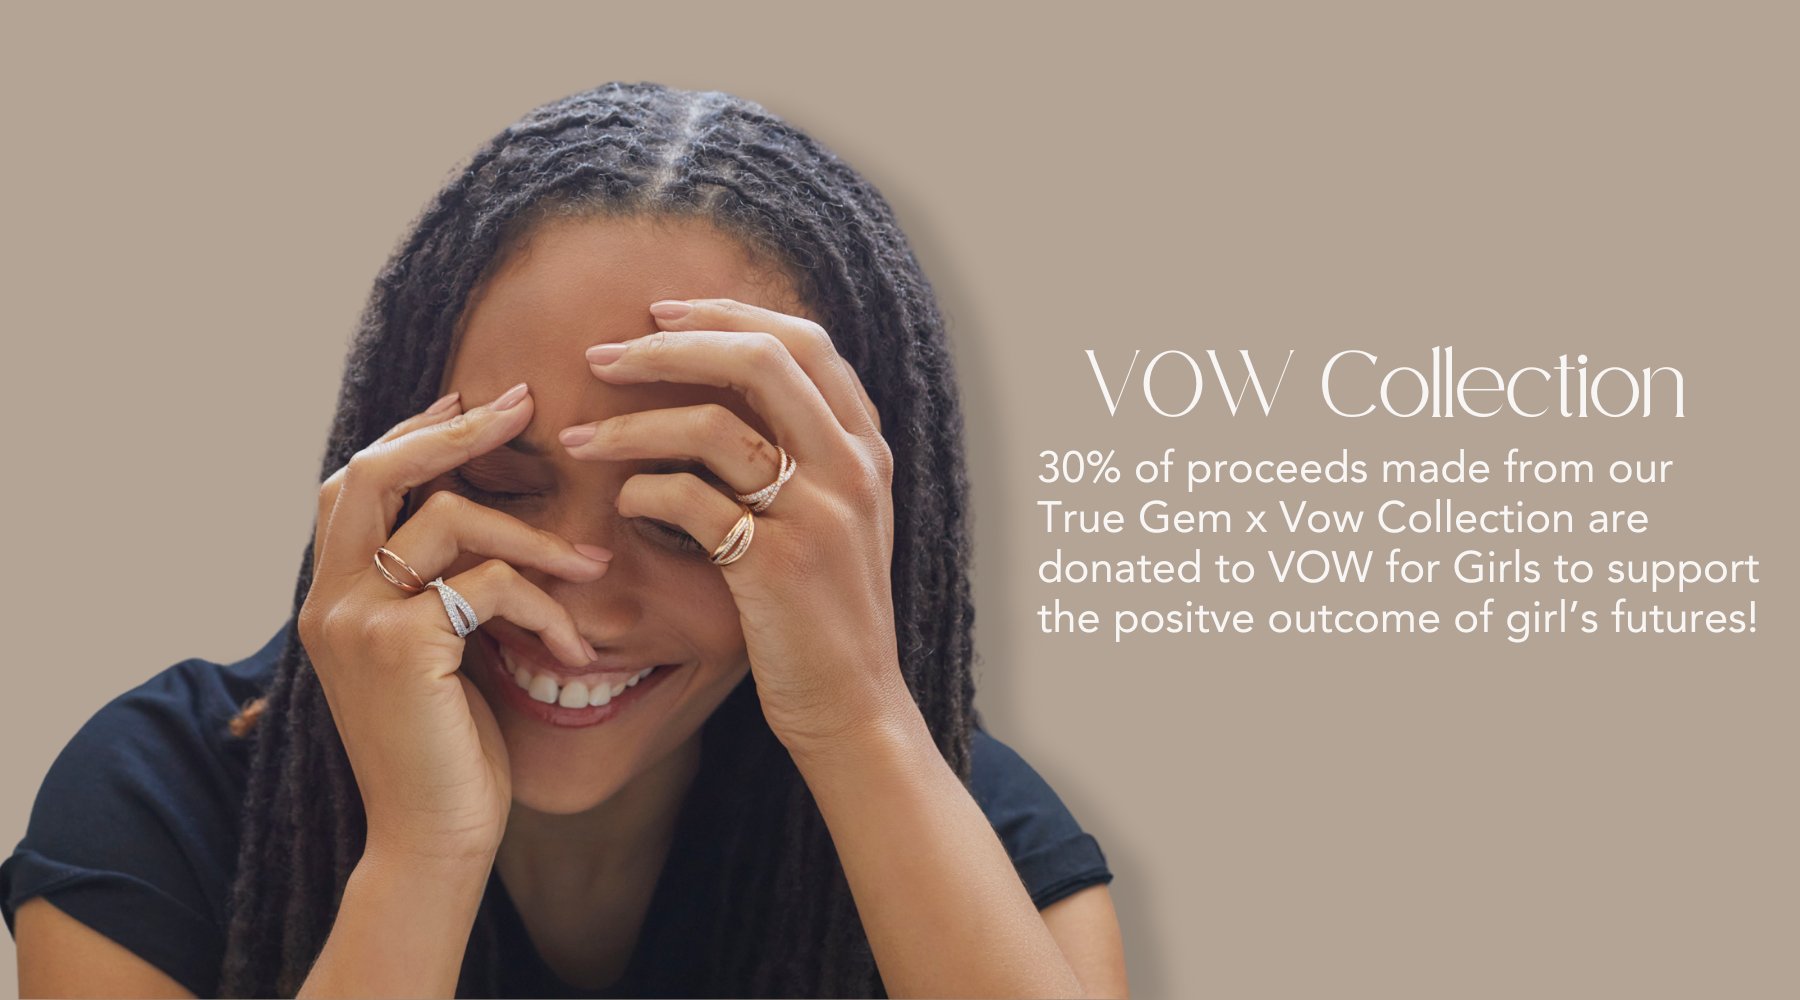 VOW Collection